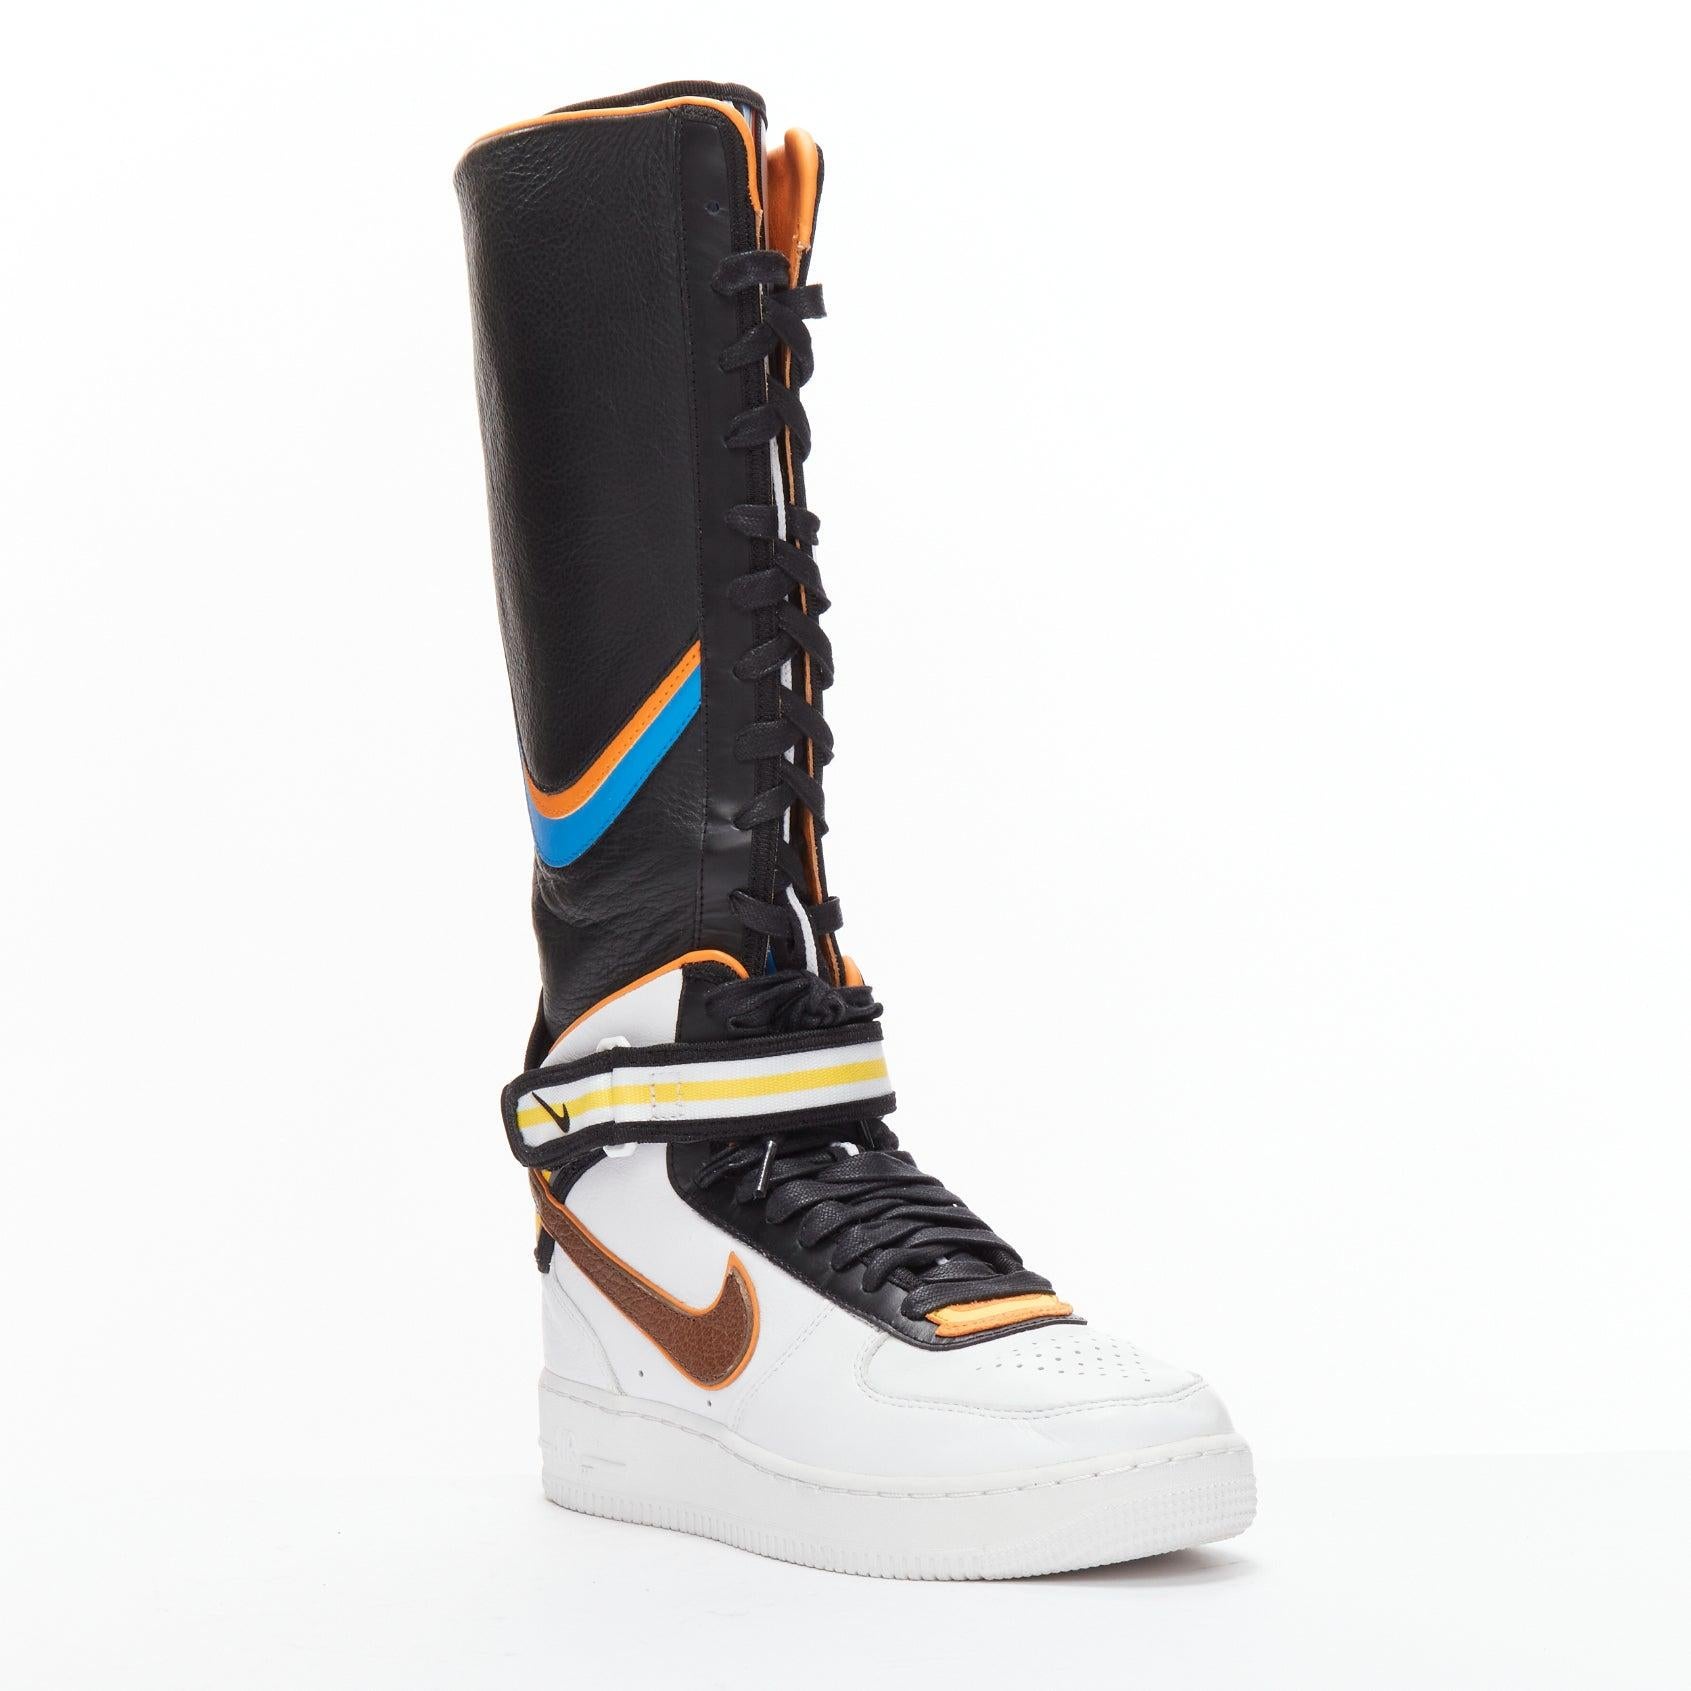 GIVENCHY NIKE Riccardo Tisci Air Force 1 Boot SP sneaker boot US8 EU38
Reference: BSHW/A00177
Brand: Nike
Designer: Riccardo Tisci
Model: Air Force 1 Boot SP
Collection: RT Tisci
Material: Leather, Fabric
Color: Black, Multicolour
Pattern: